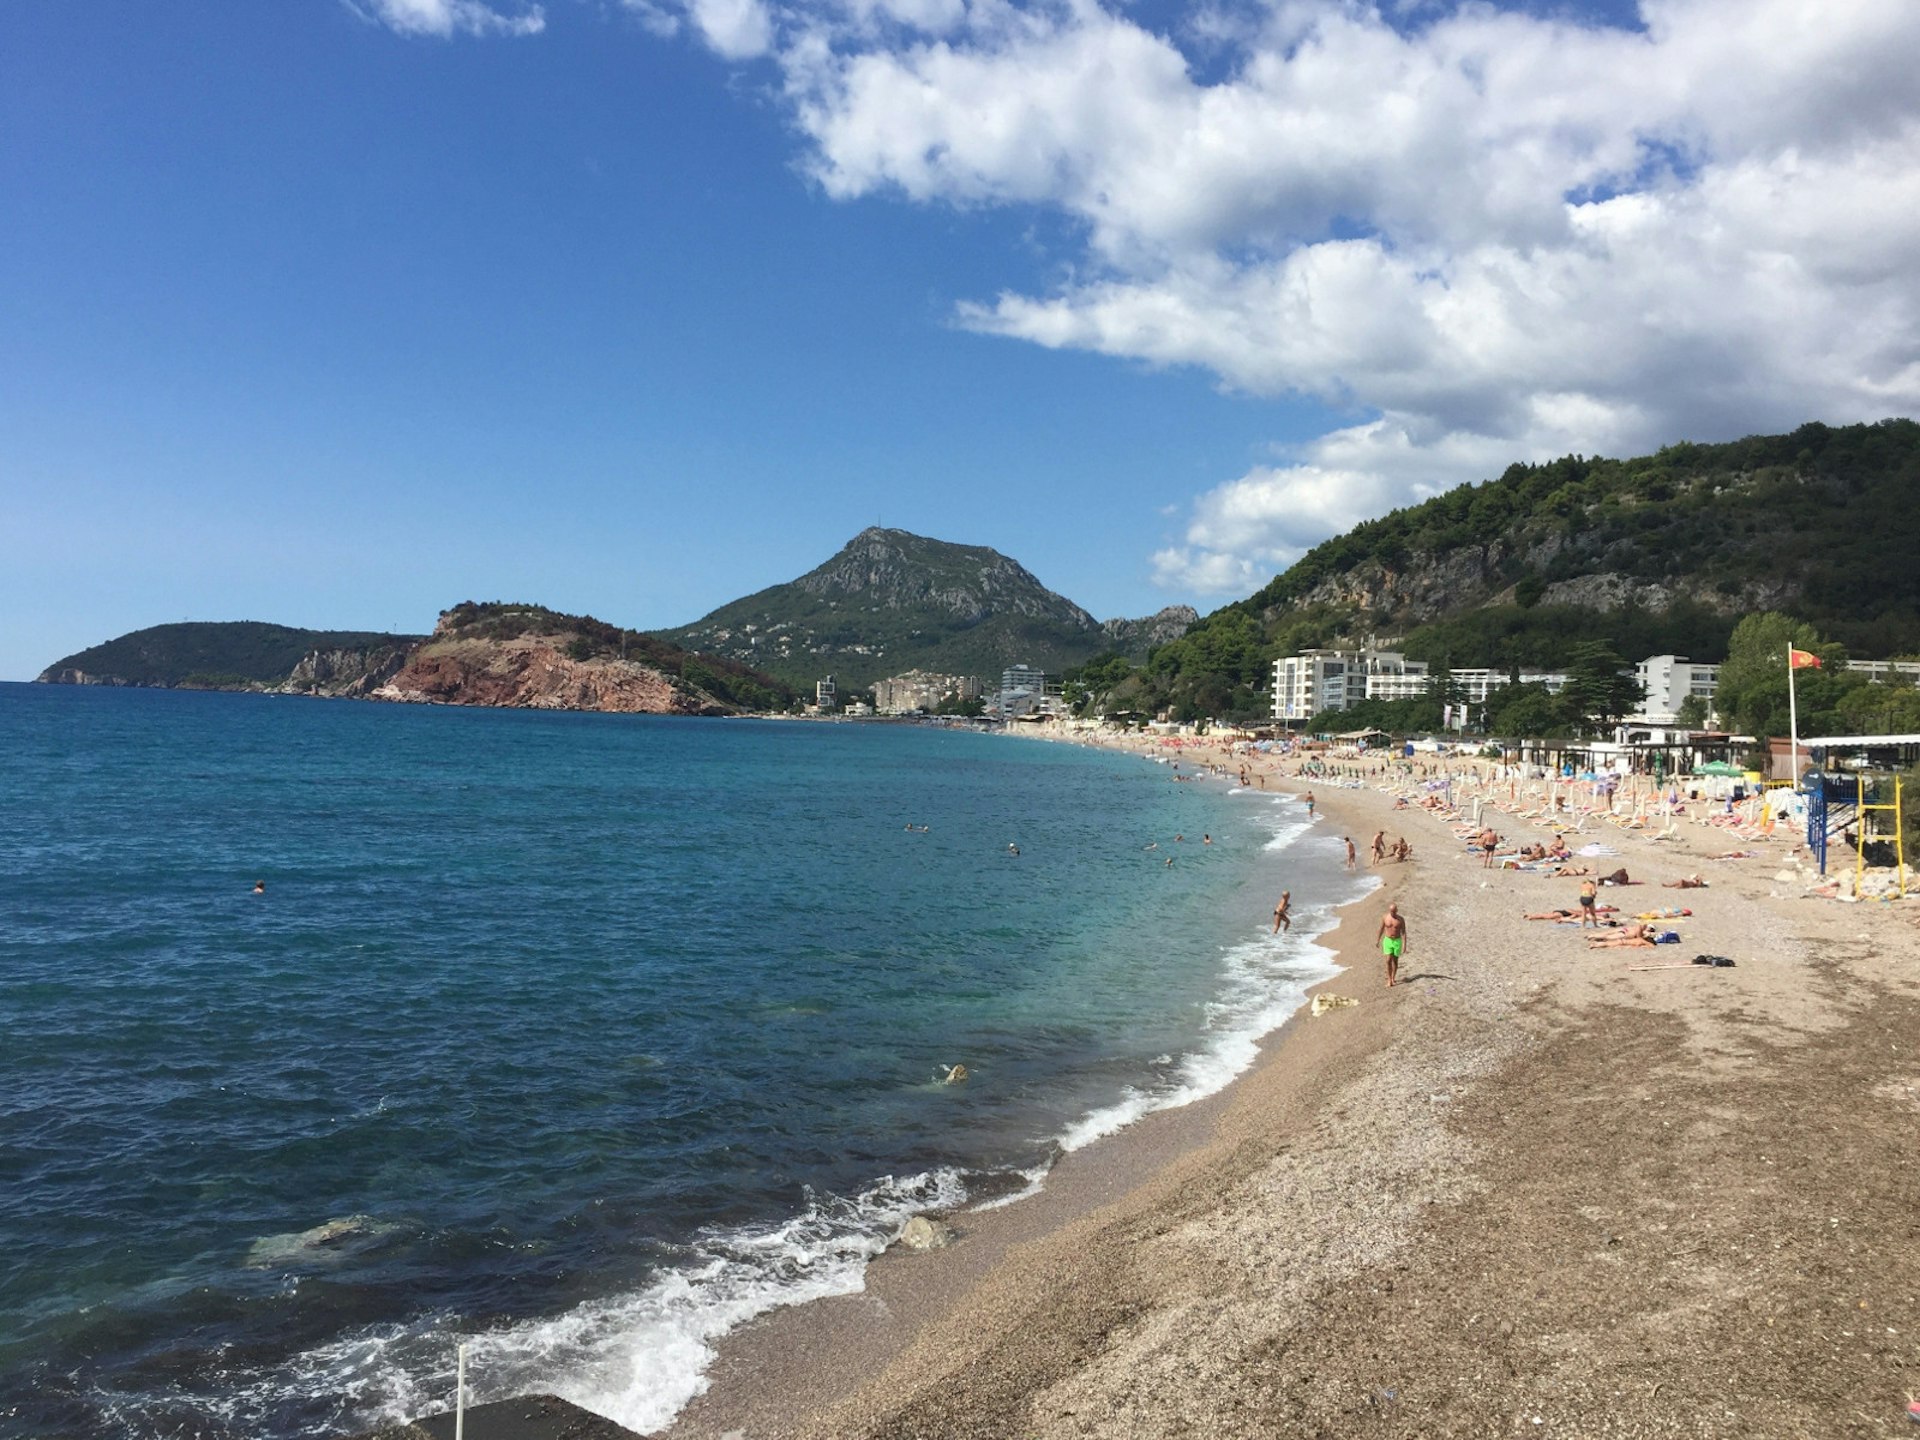 Beach views in Sutomore, the last stop before the train reaches the port of Bar 